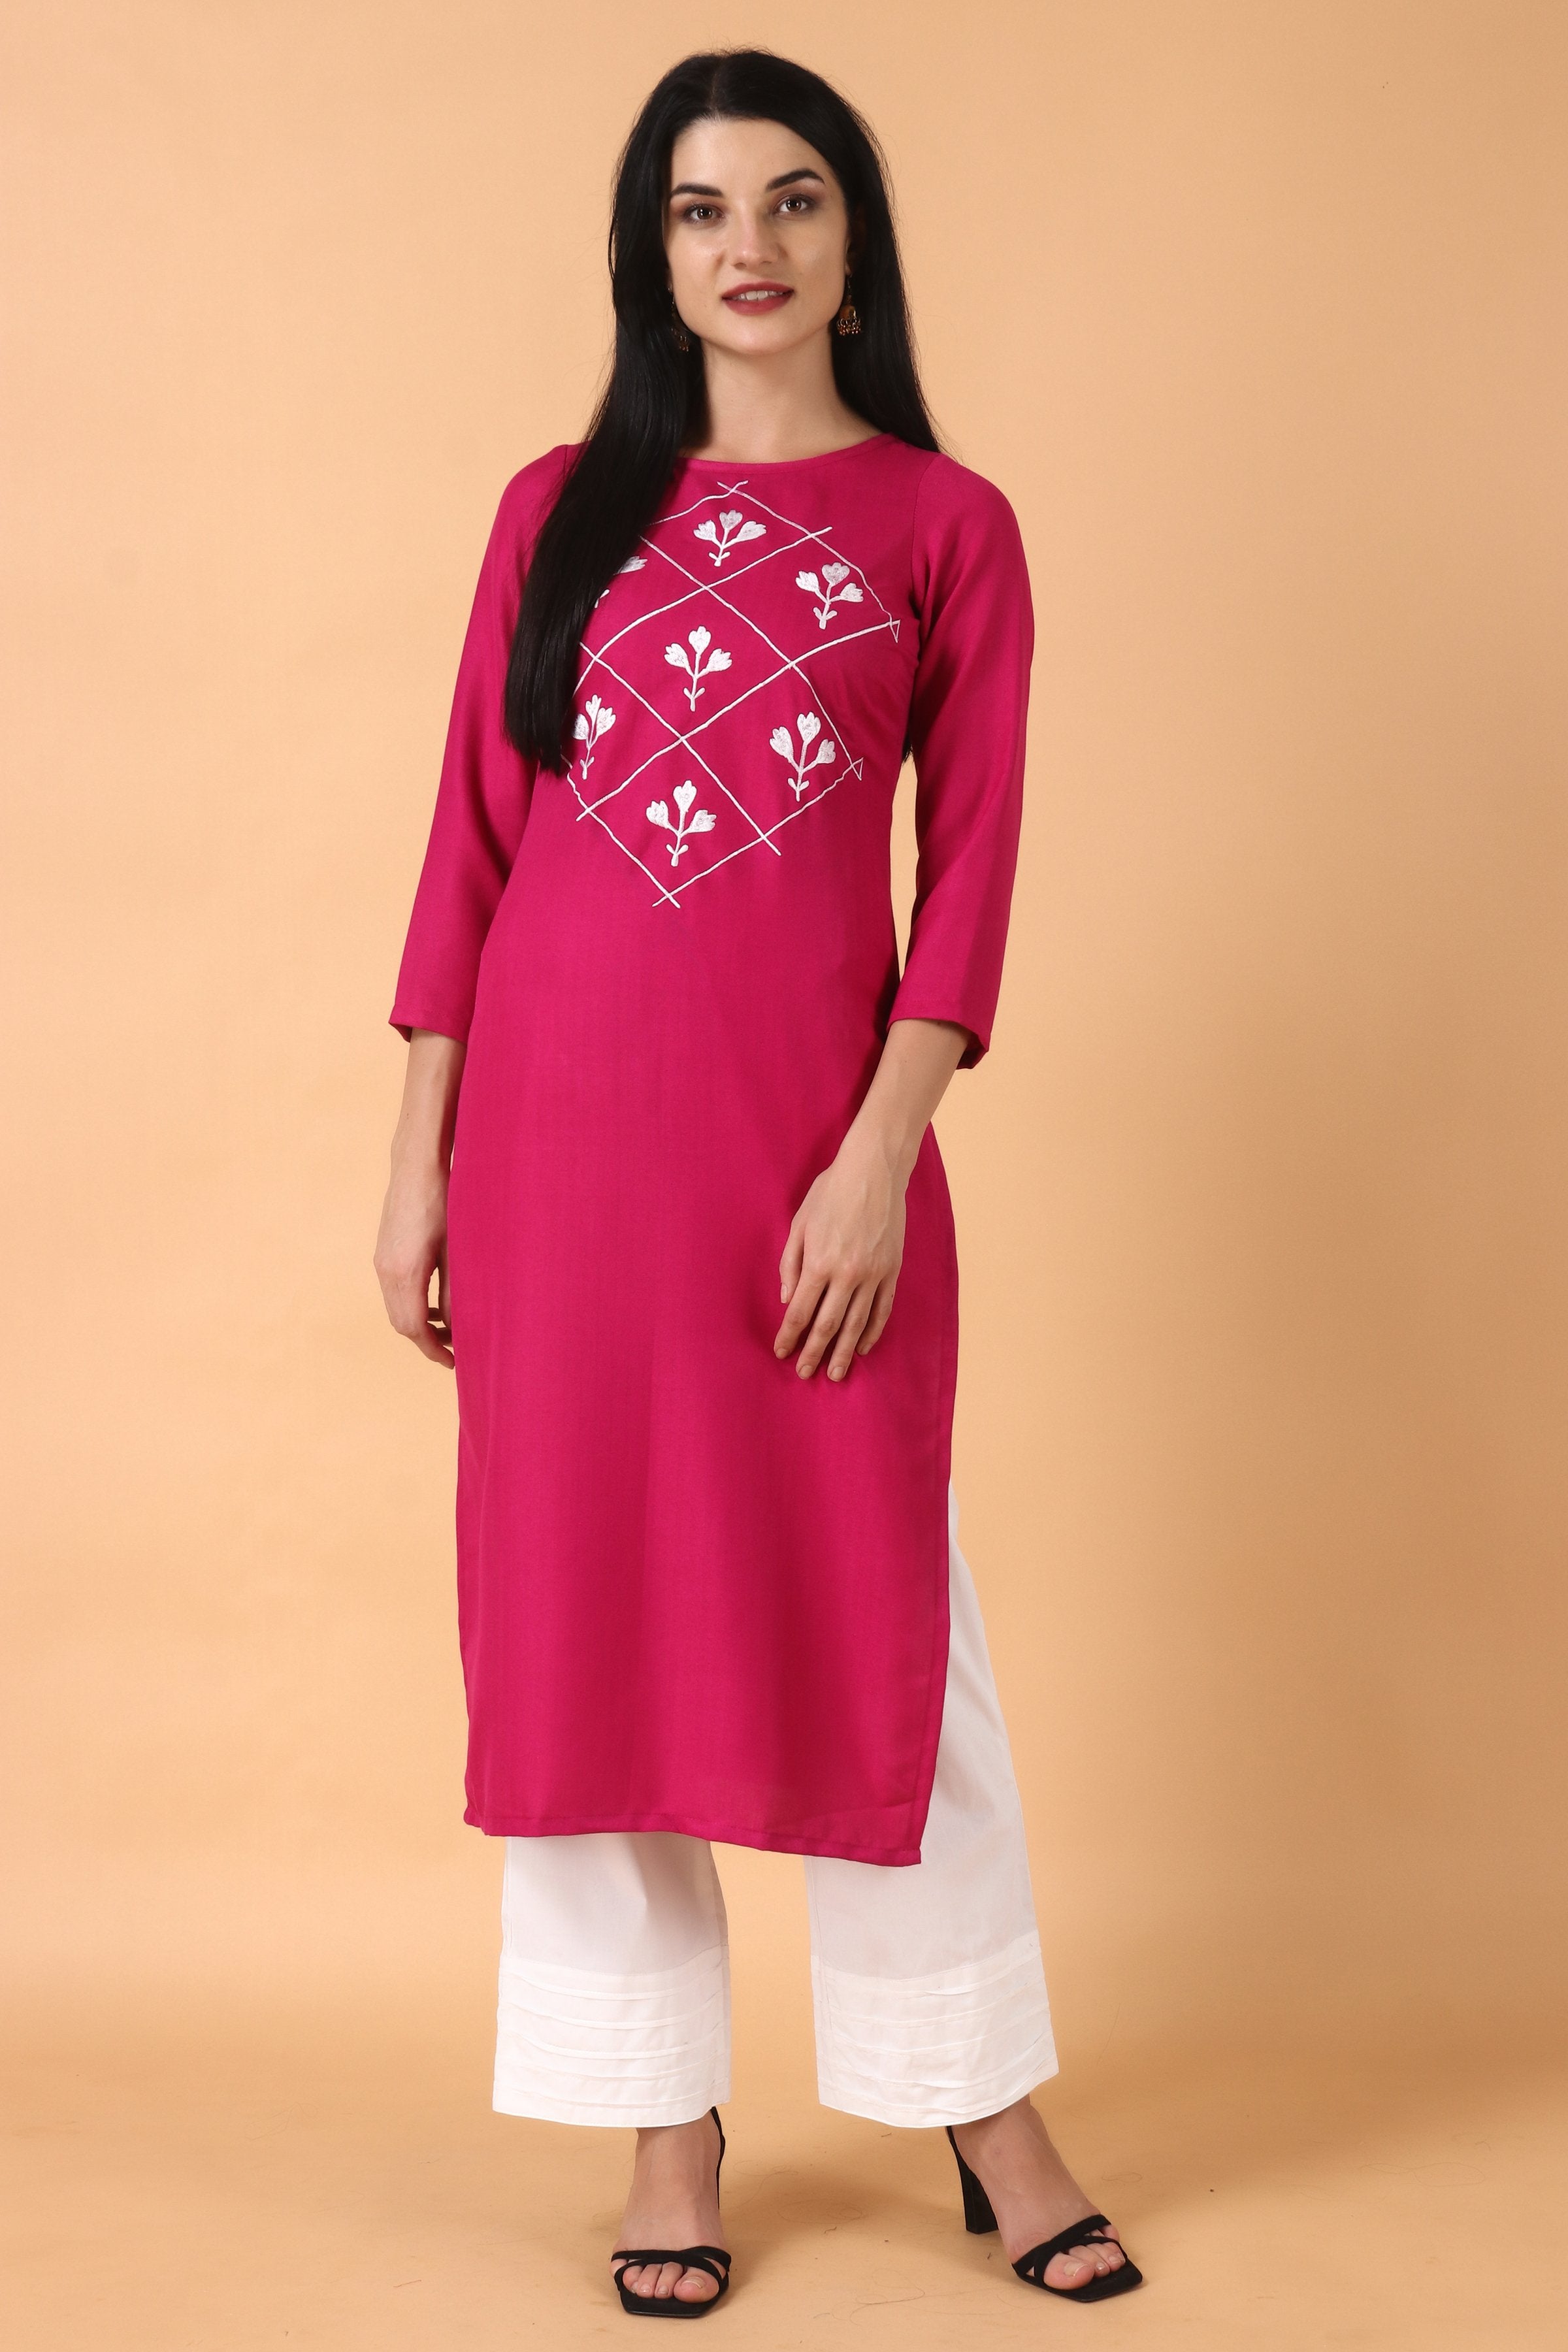 Sunayna Collection - #woolen kurti set # limited stock Hurry up Order now  8950525095 | Facebook